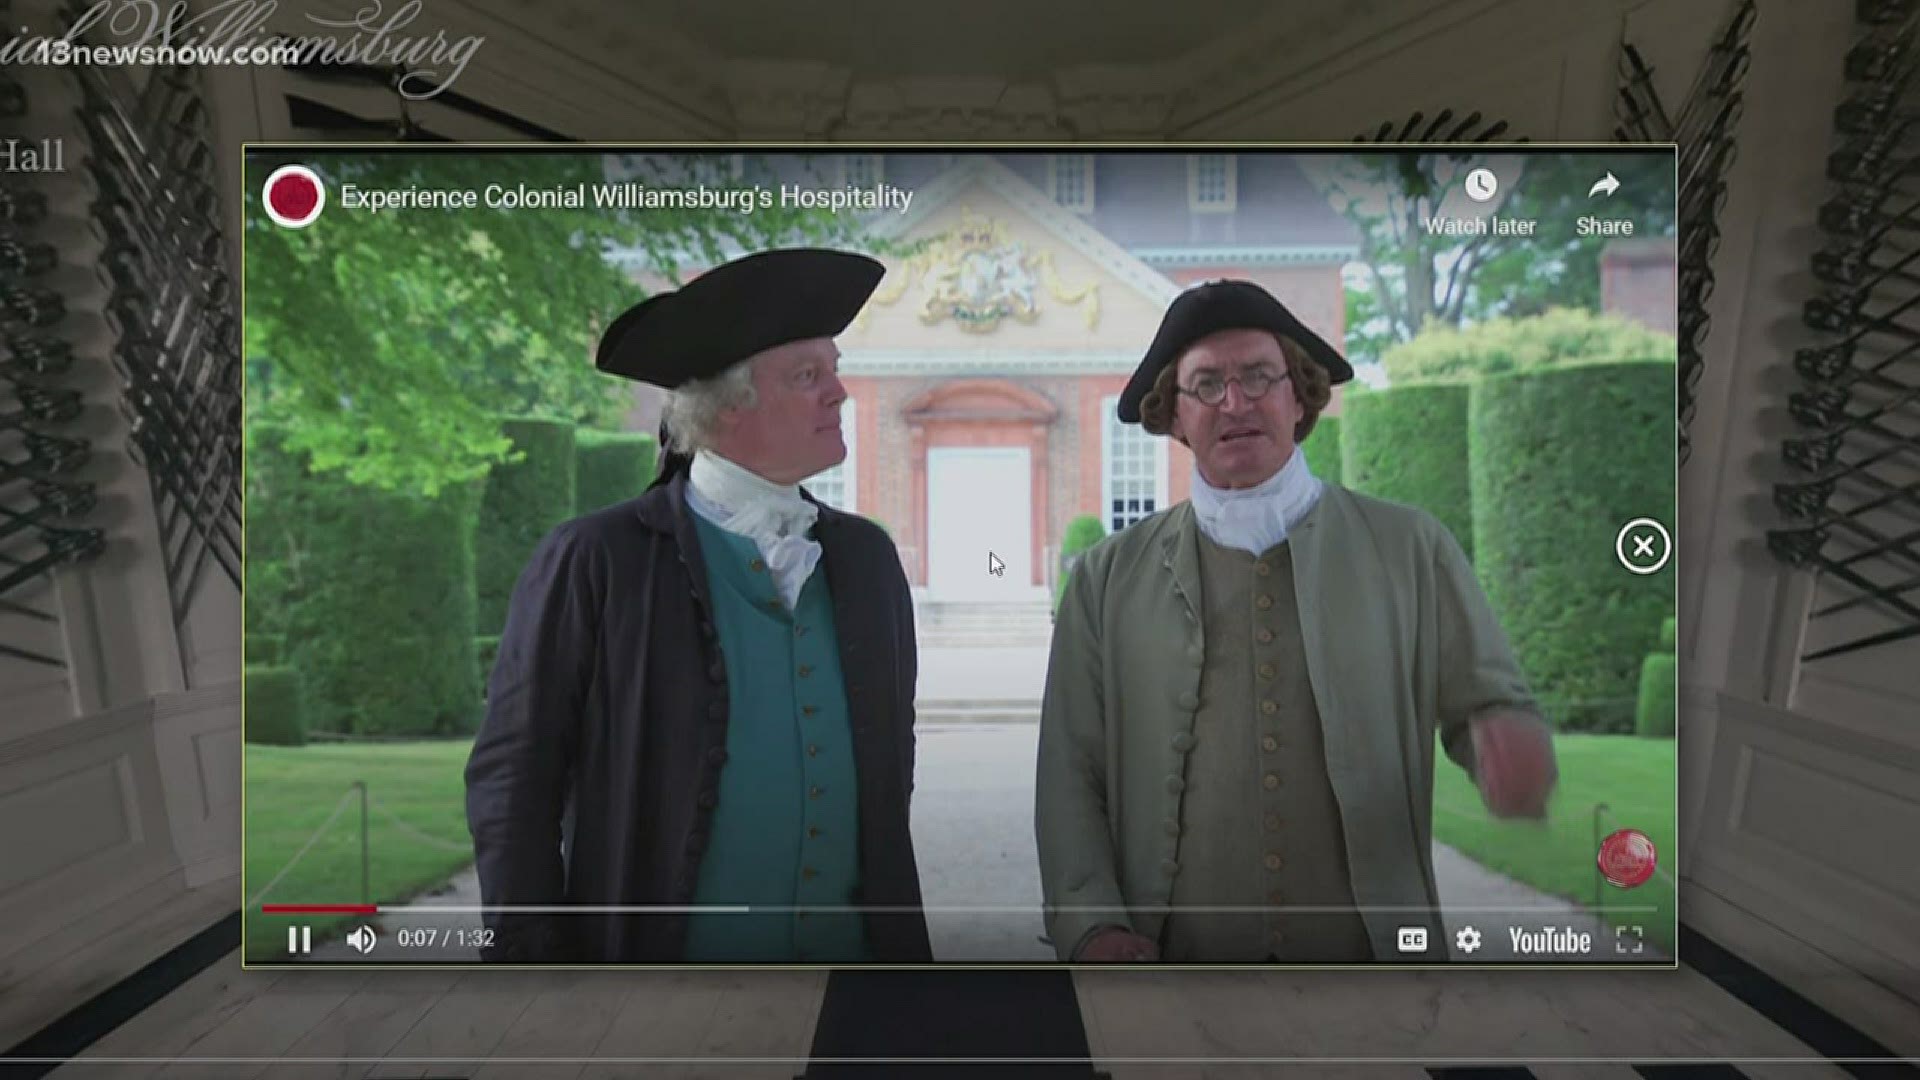 13News Now Connor Rhiel learned how Colonial Williamsburg is conducting virtual tours in the midst of COVID-19.